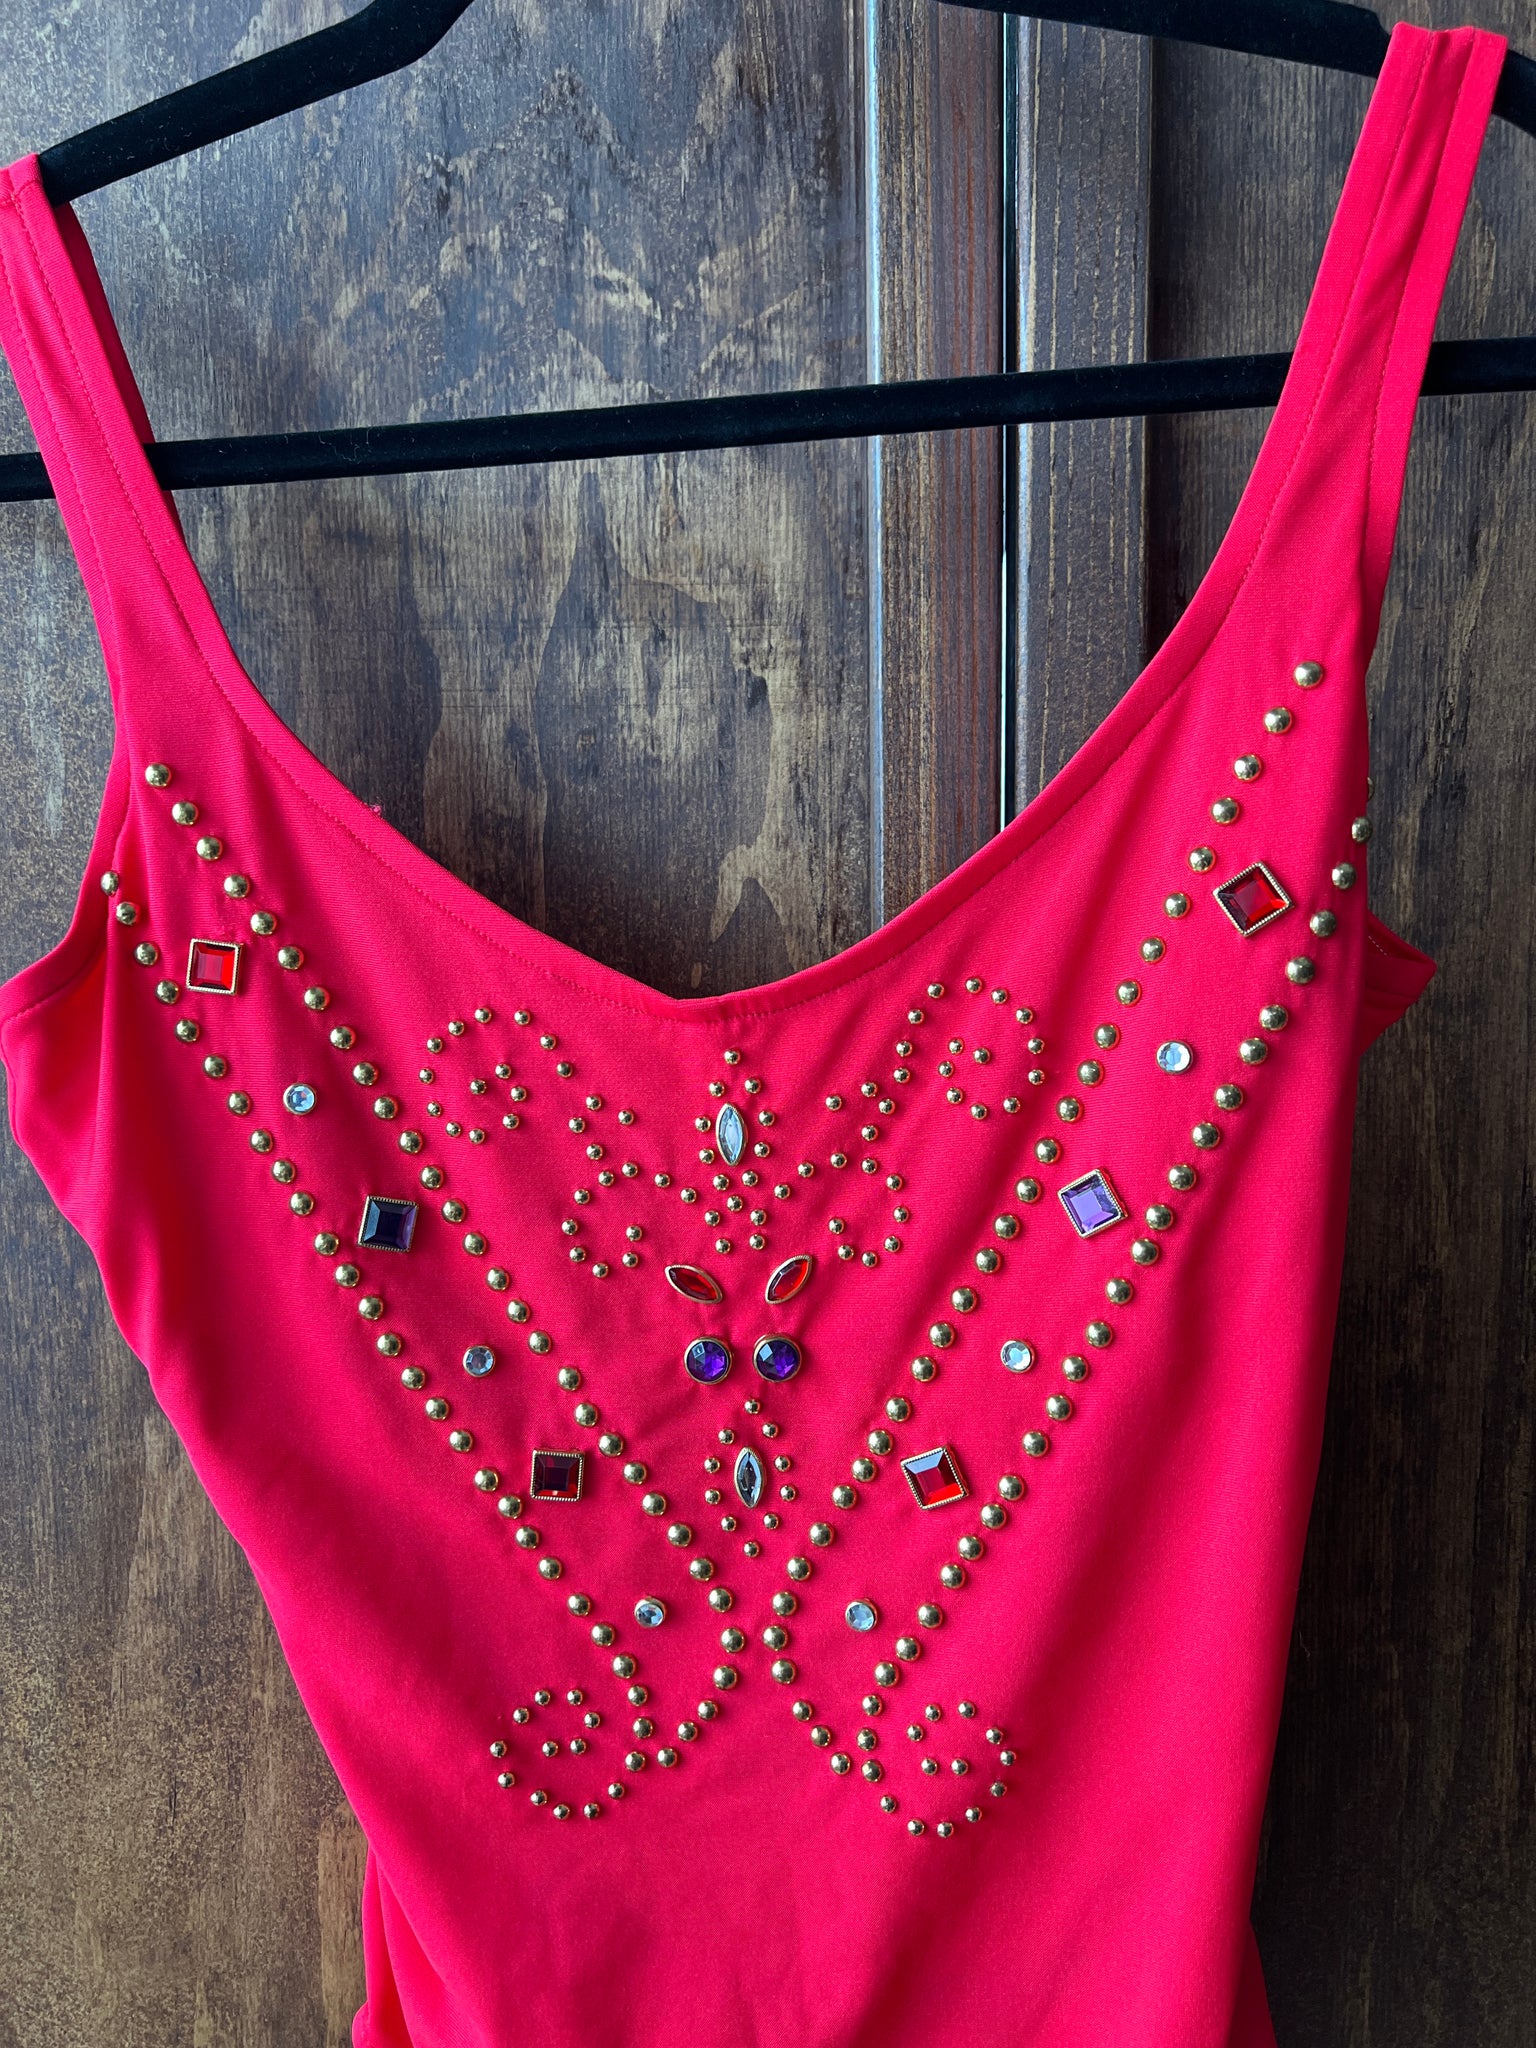 1980s BATHING SUIT- Rose Marie Reid red studded